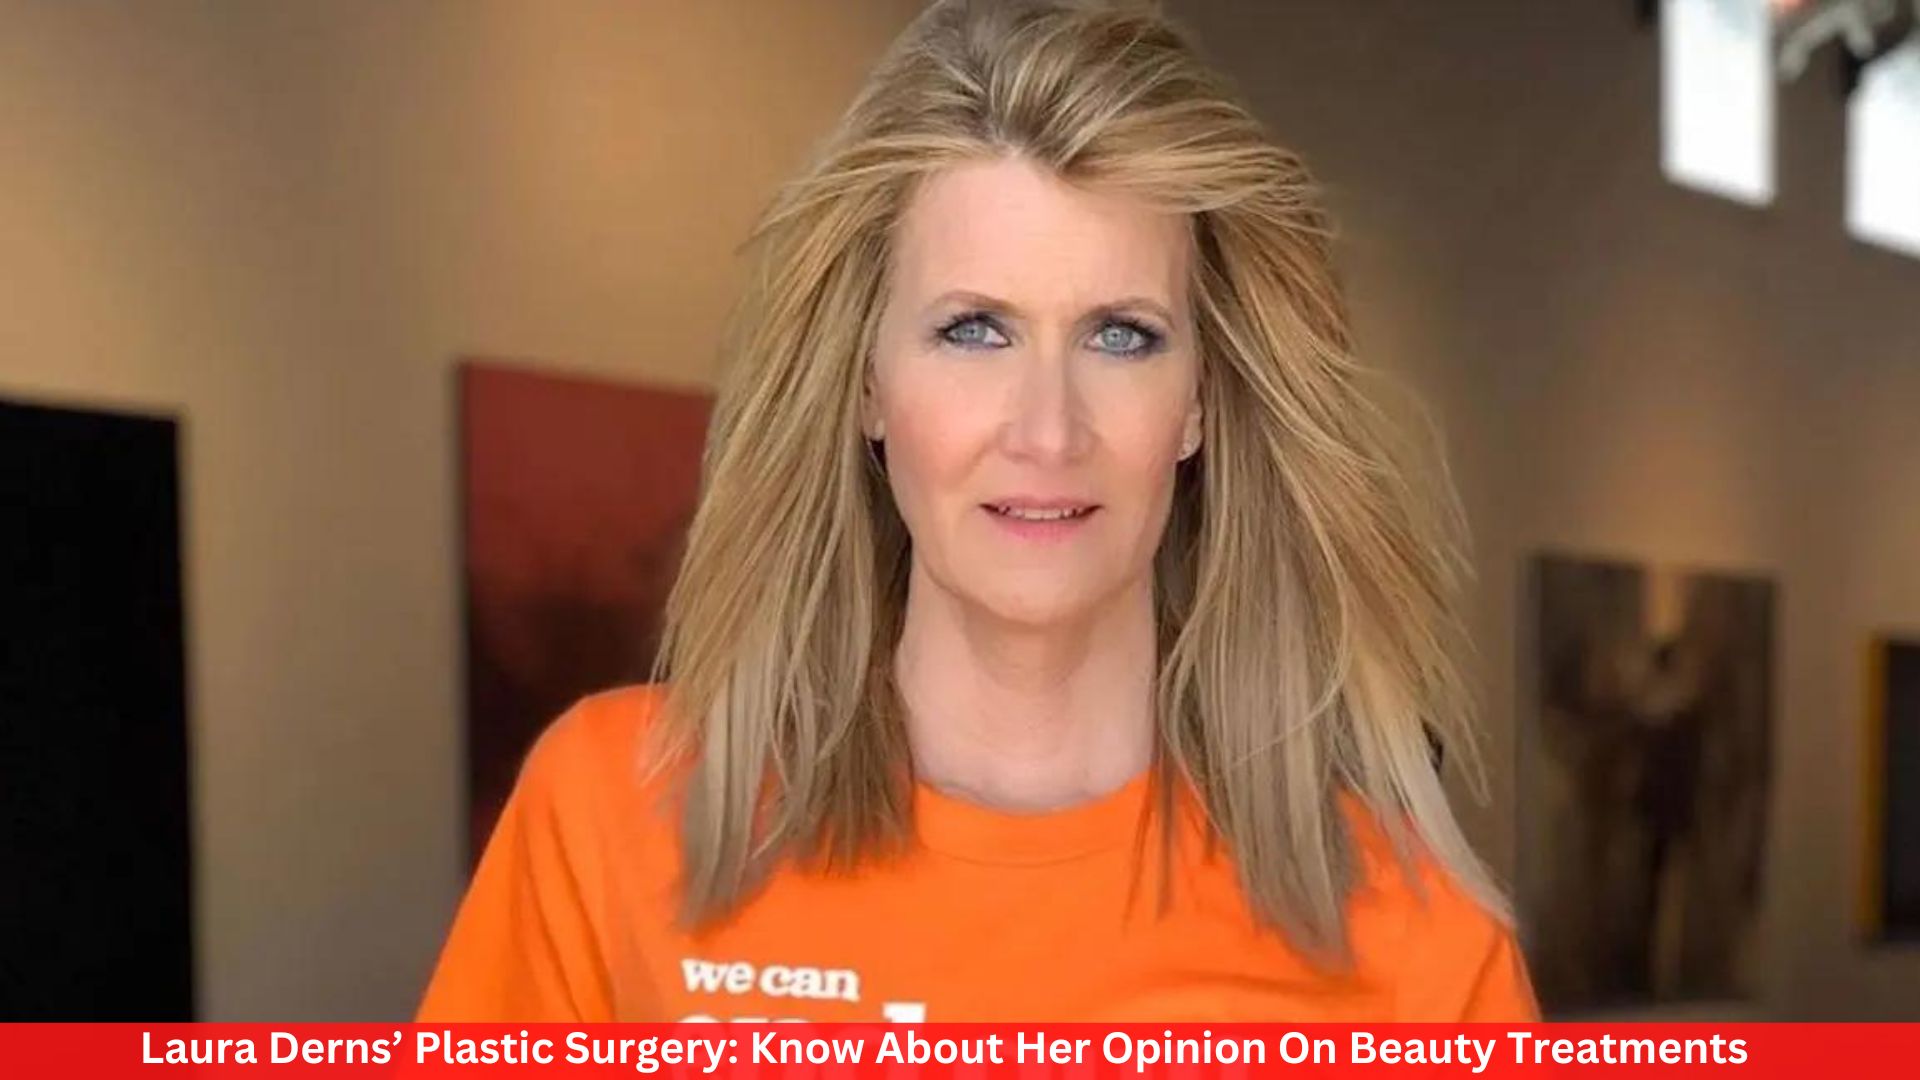 Laura Derns’ Plastic Surgery: Know About Her Opinion On Beauty Treatments